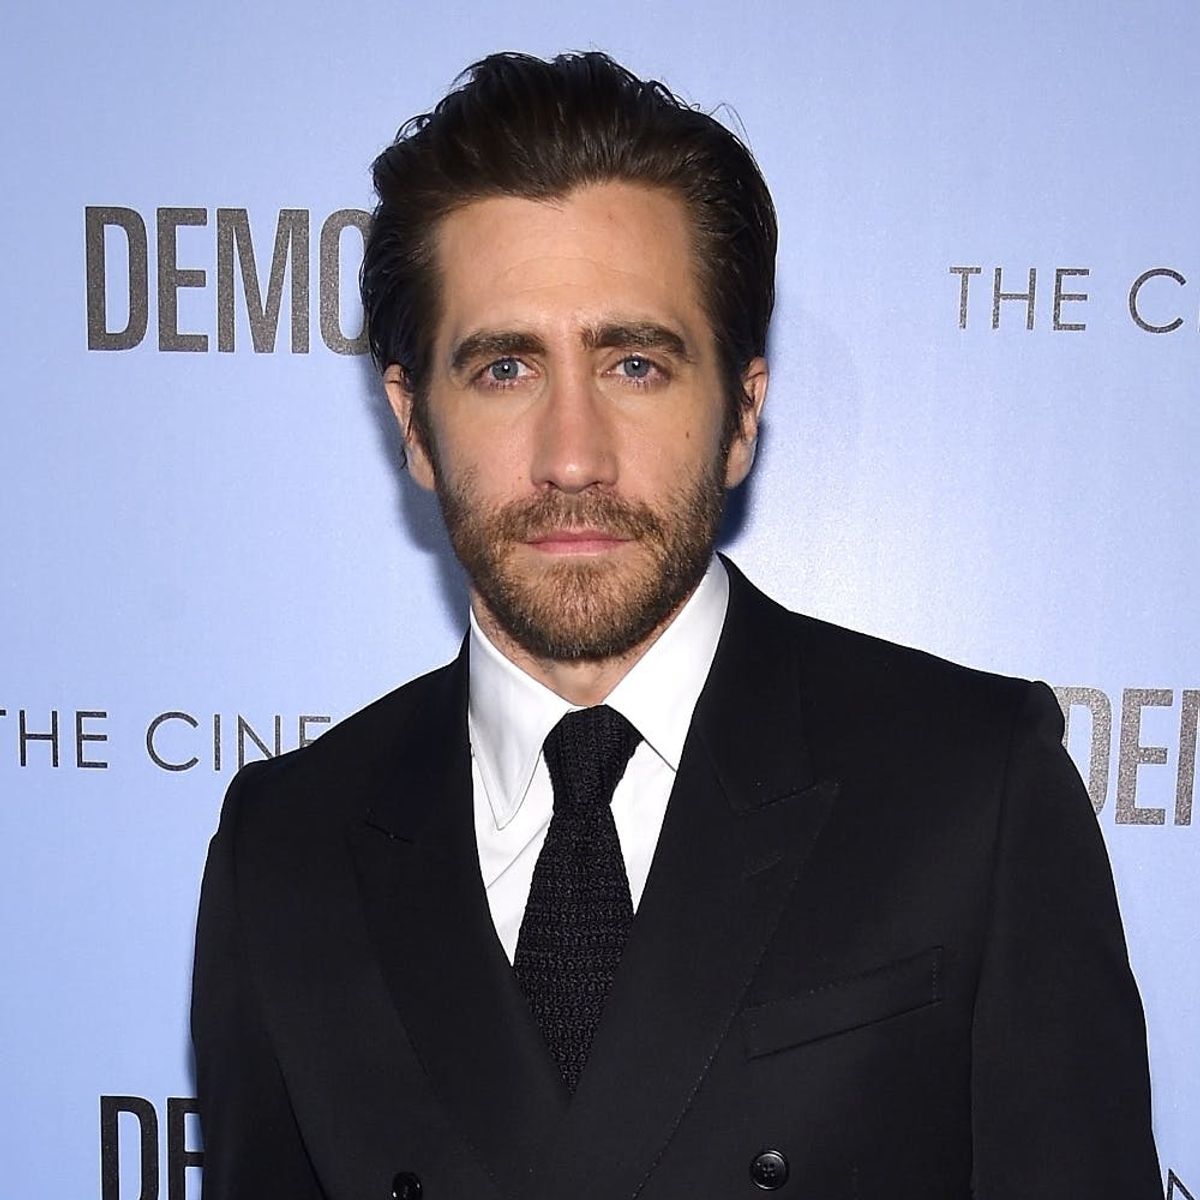 Jake Gyllenhaal Singing “A Whole New World” at the Tonys Will Totally Intensify Your Crush